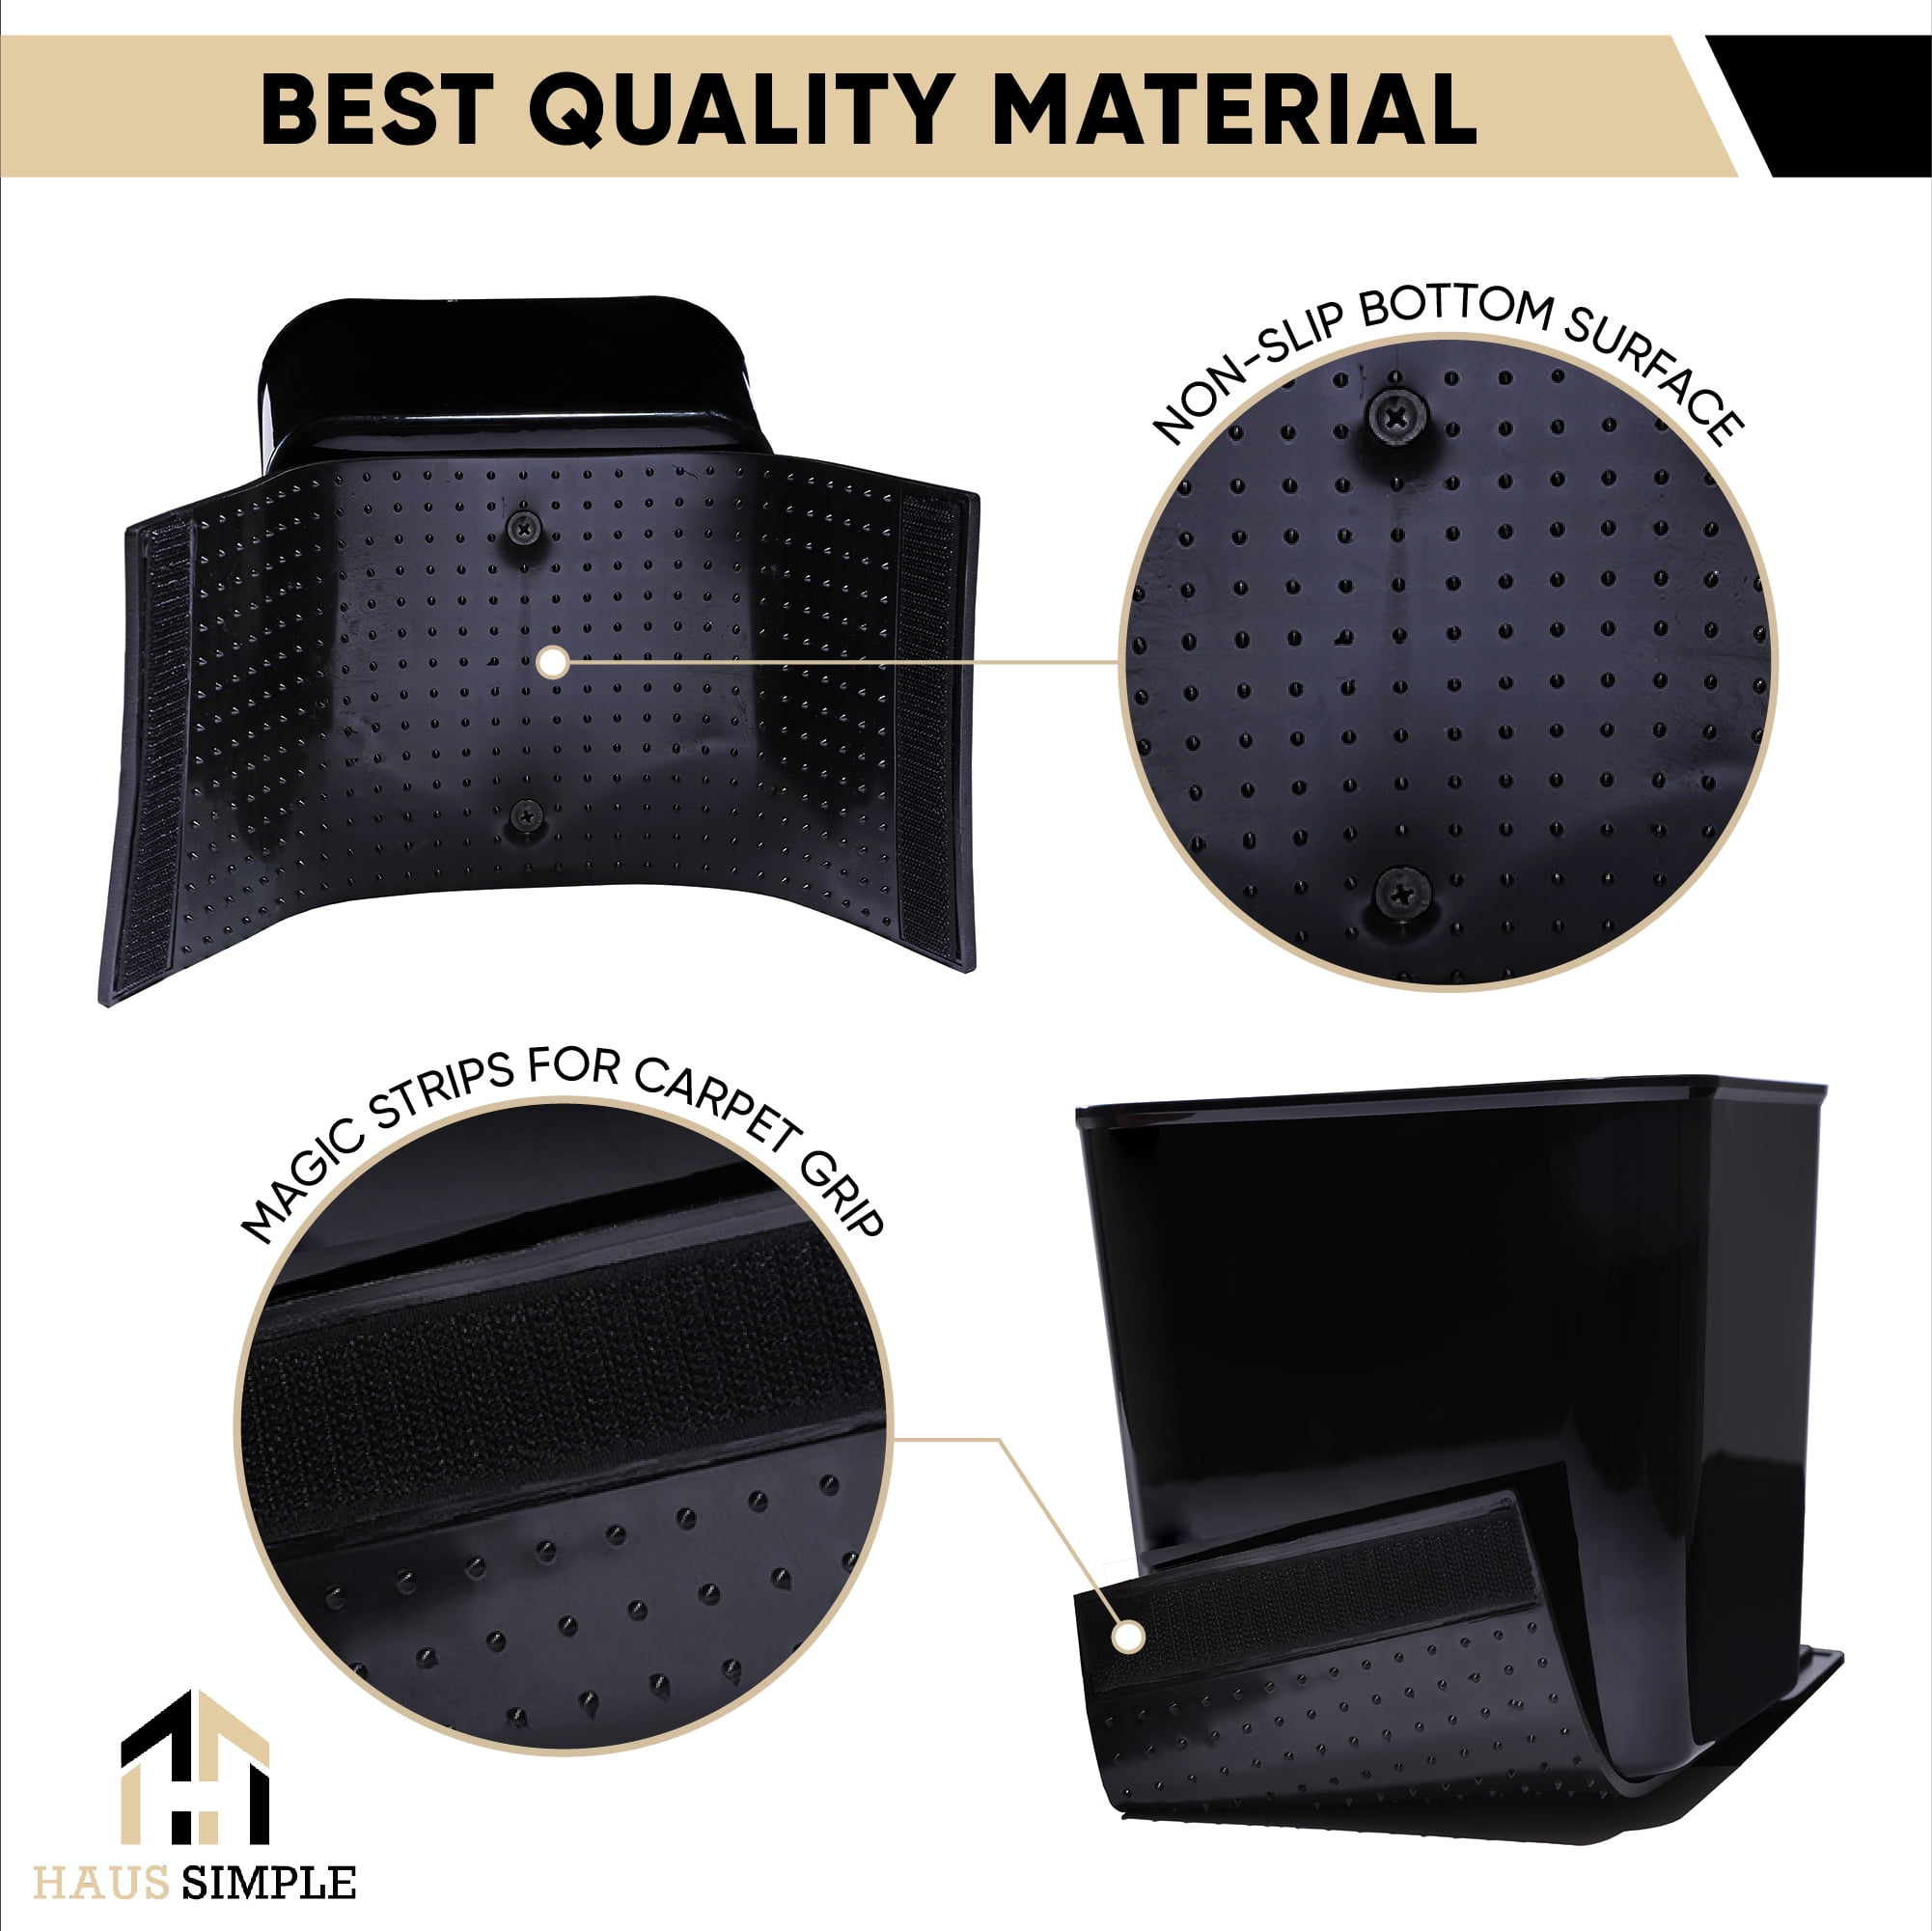 Car Trash Can Universal Fit Auto Garbage Bin Spill-Proof Stability Flaps  (Black)